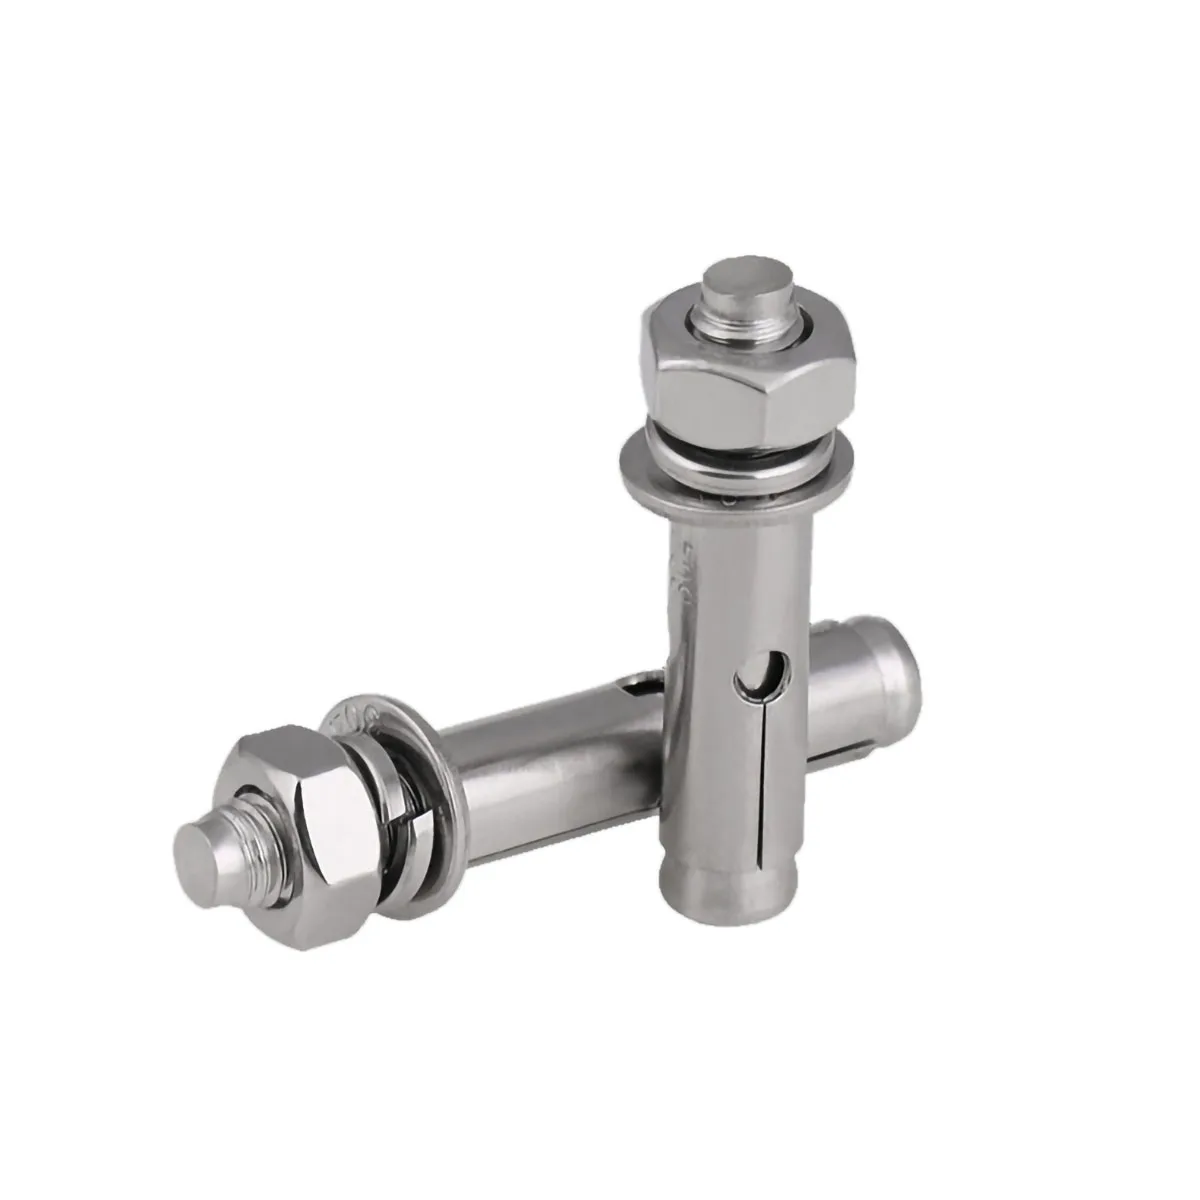 

Hex Head Built-in Expansion Screw M6 M8 M10 M12 M14 M16 M20 304 A2 Stainless Steel Concrete Anchor Bolts